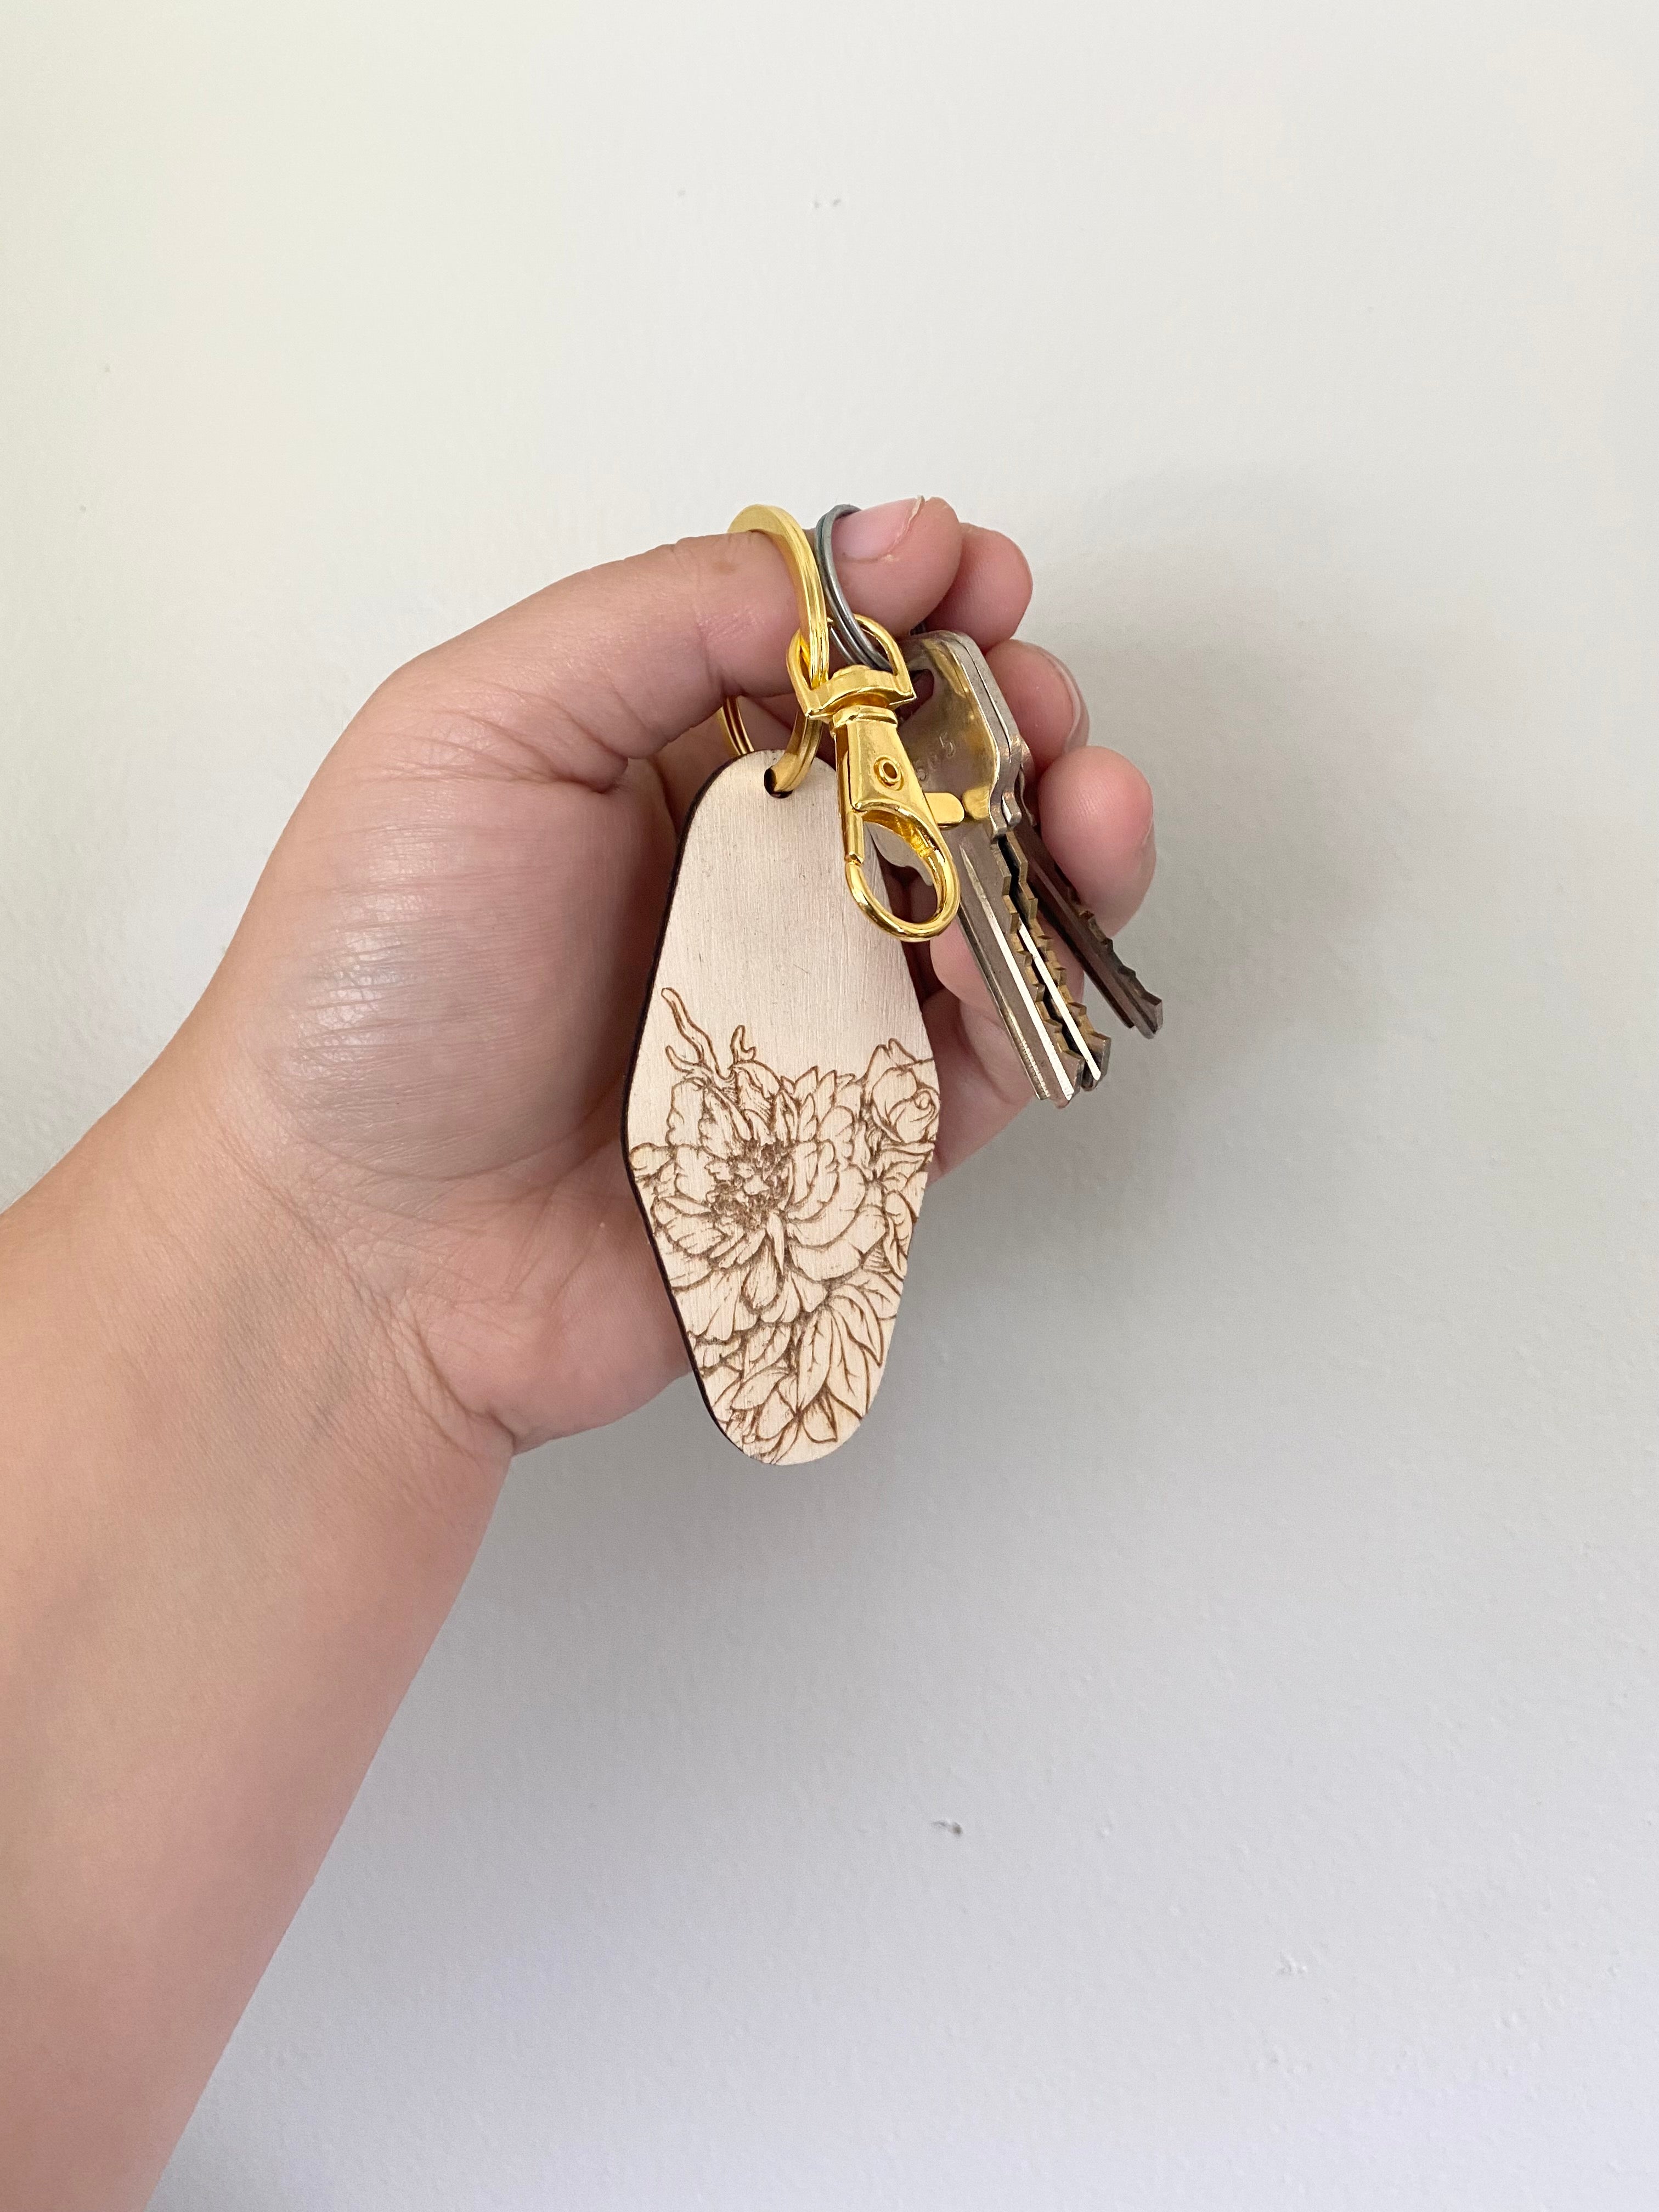 Peony Laser Engraved Key Chain